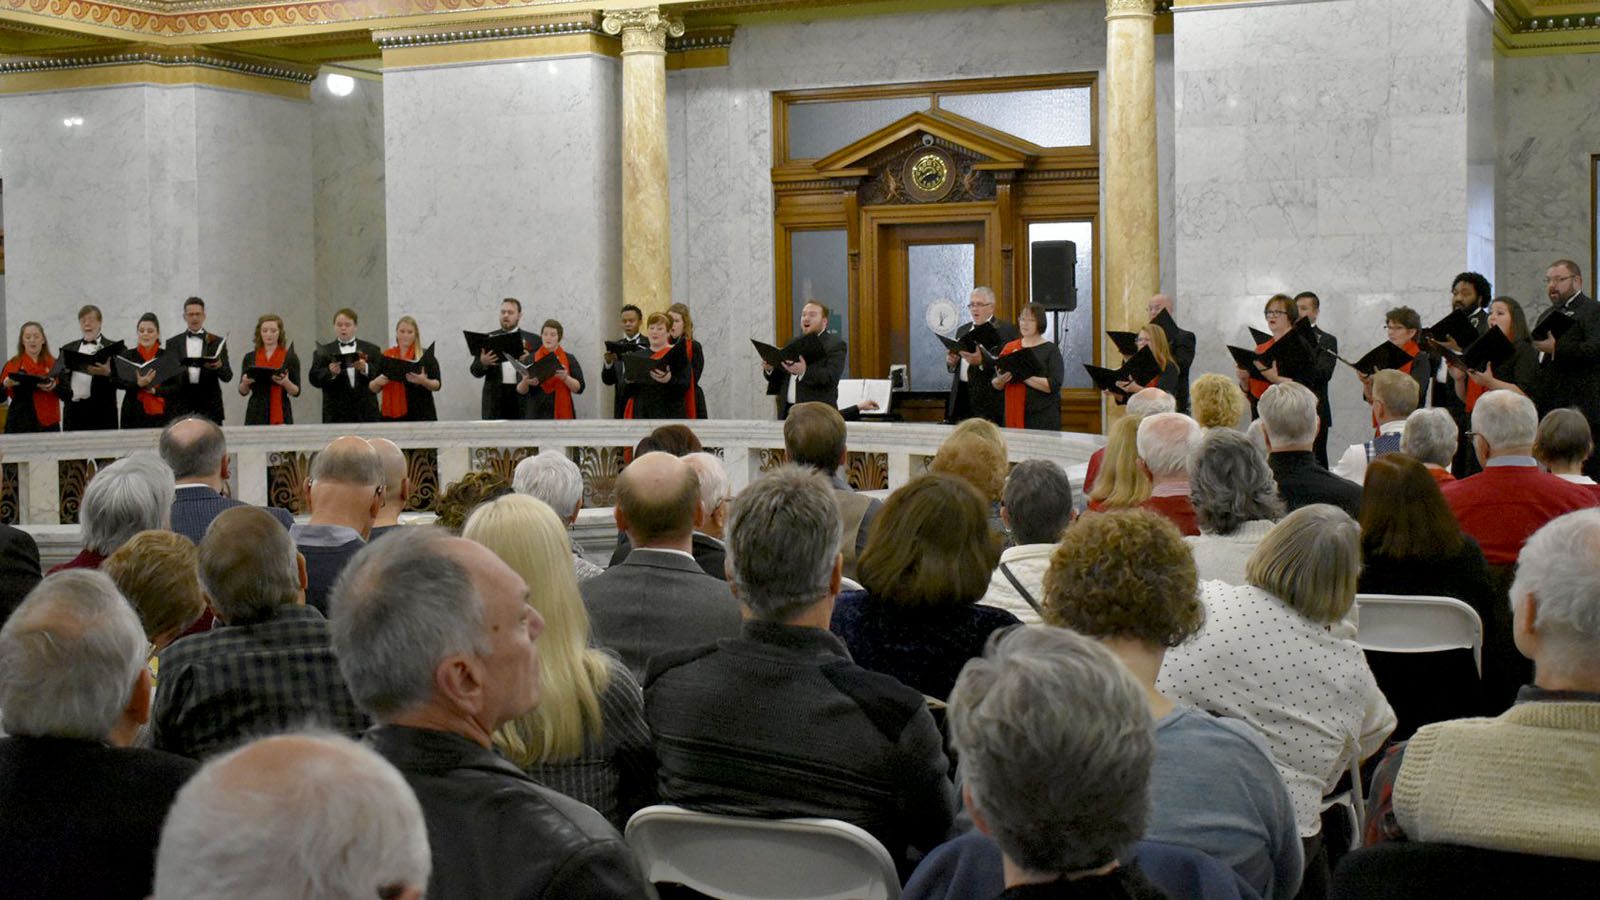 Heartland Sings will put on their Spirit of Christmas concert at Allen County Courthouse on Dec. 15-17.